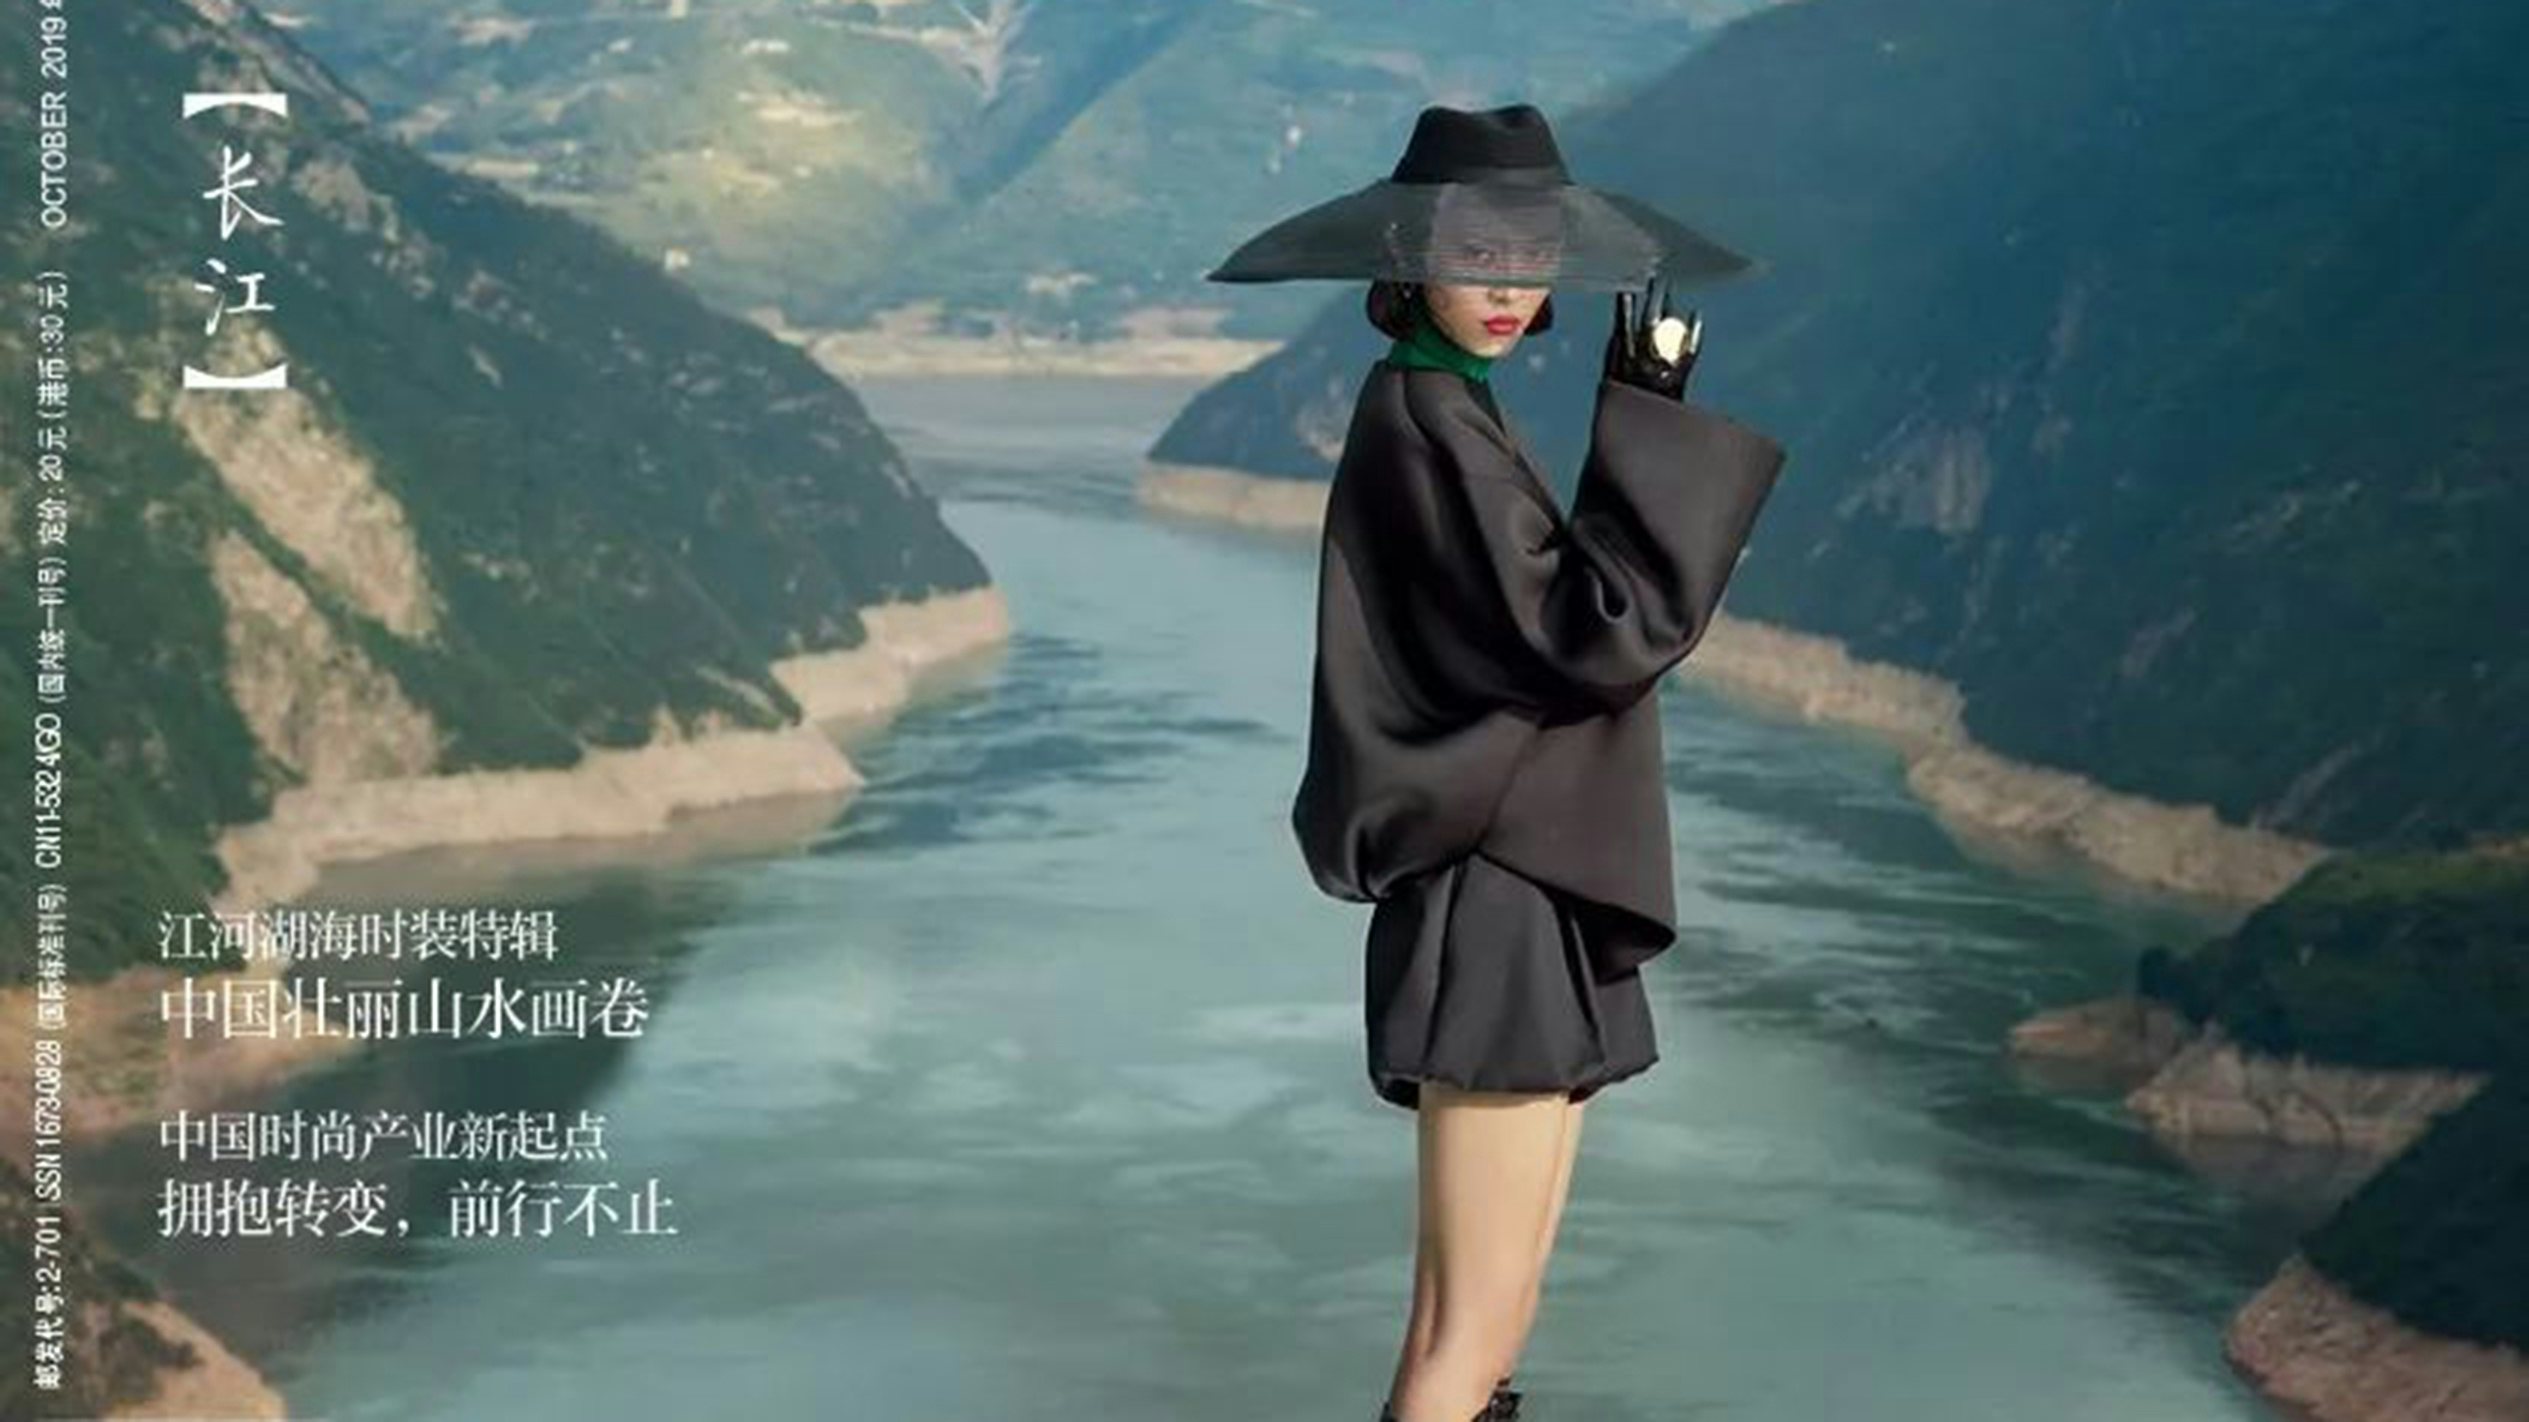 Due to China’s rising economic power, contemporary Chinese identity is becoming a popular theme in fashion media. What can brands learn from these stories? Photo: Harper's Bazaar China.